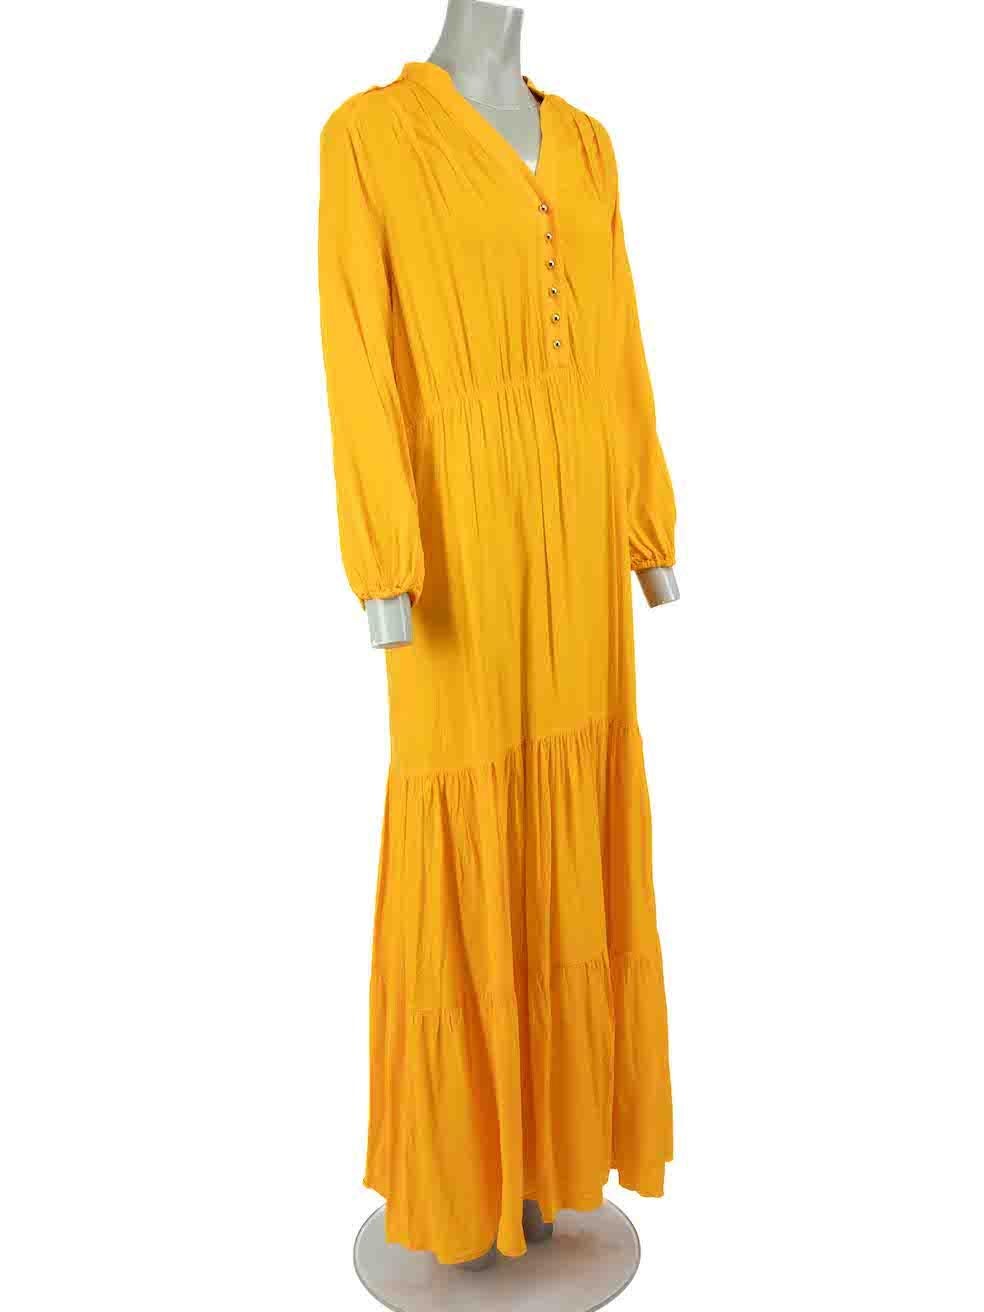 CONDITION is Very good. Hardly any visible wear to dress is evident on this used Melissa Odabash designer resale item.
 
Details
Orange
Viscose
Dress
Maxi
V-neck
Long sleeves
Button up fastening
Tiered skirt

Made in China
 
Composition
100%